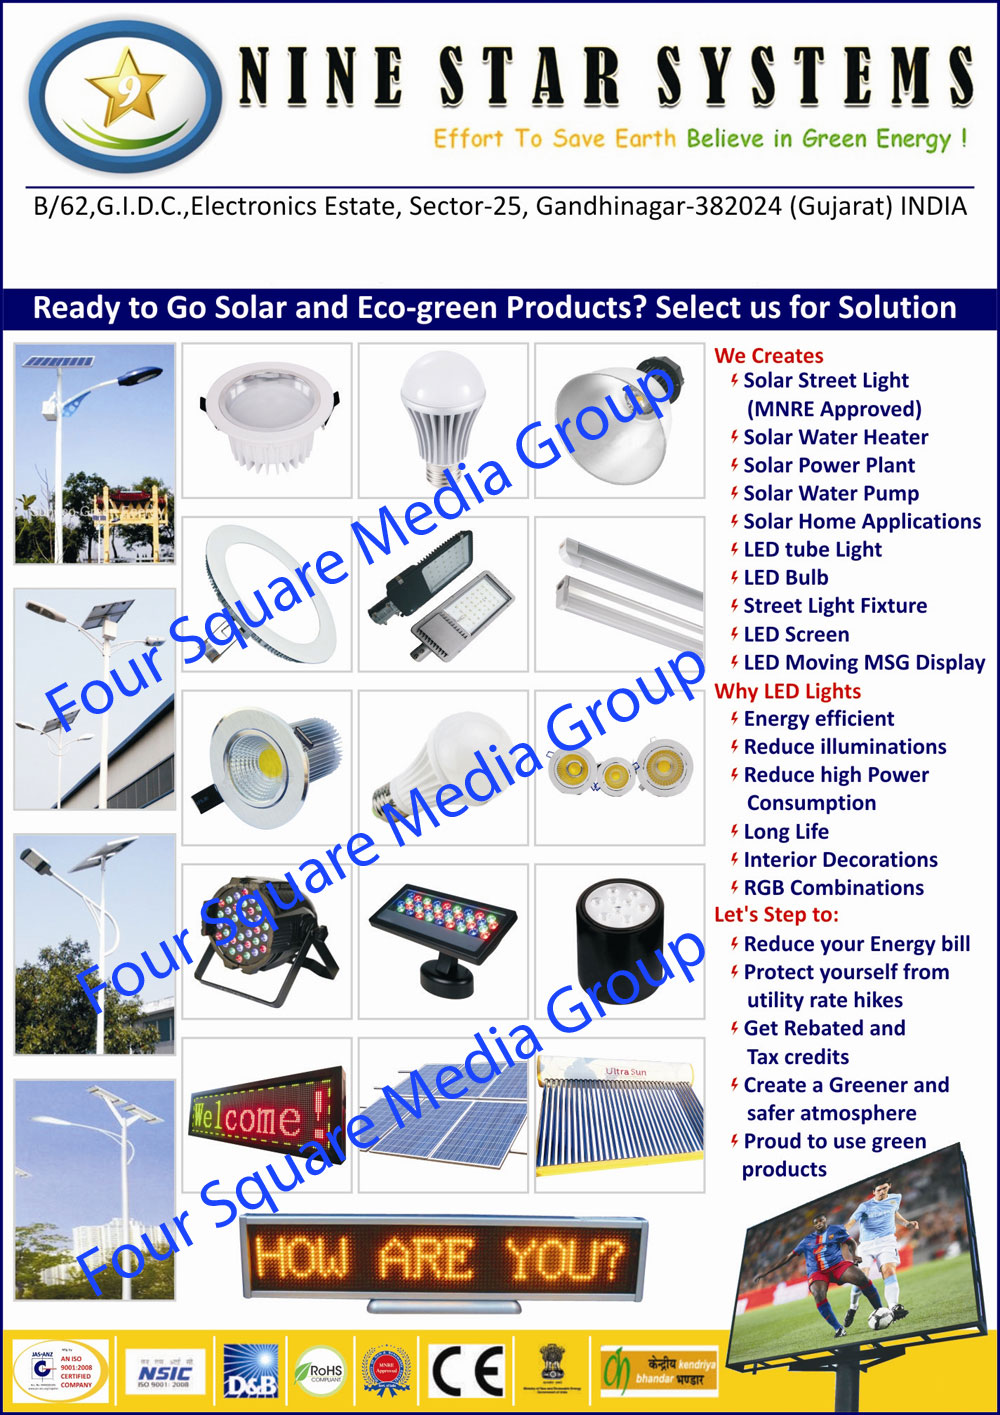 Solar Street Lights, Solar Water Heaters, Solar Power Plants, Solar Water Pumps, Solar Home Applications, Solar Tube Lights, Solar Bulbs, Street Light Fixtures, Led Screens, Led Moving MSG Displays